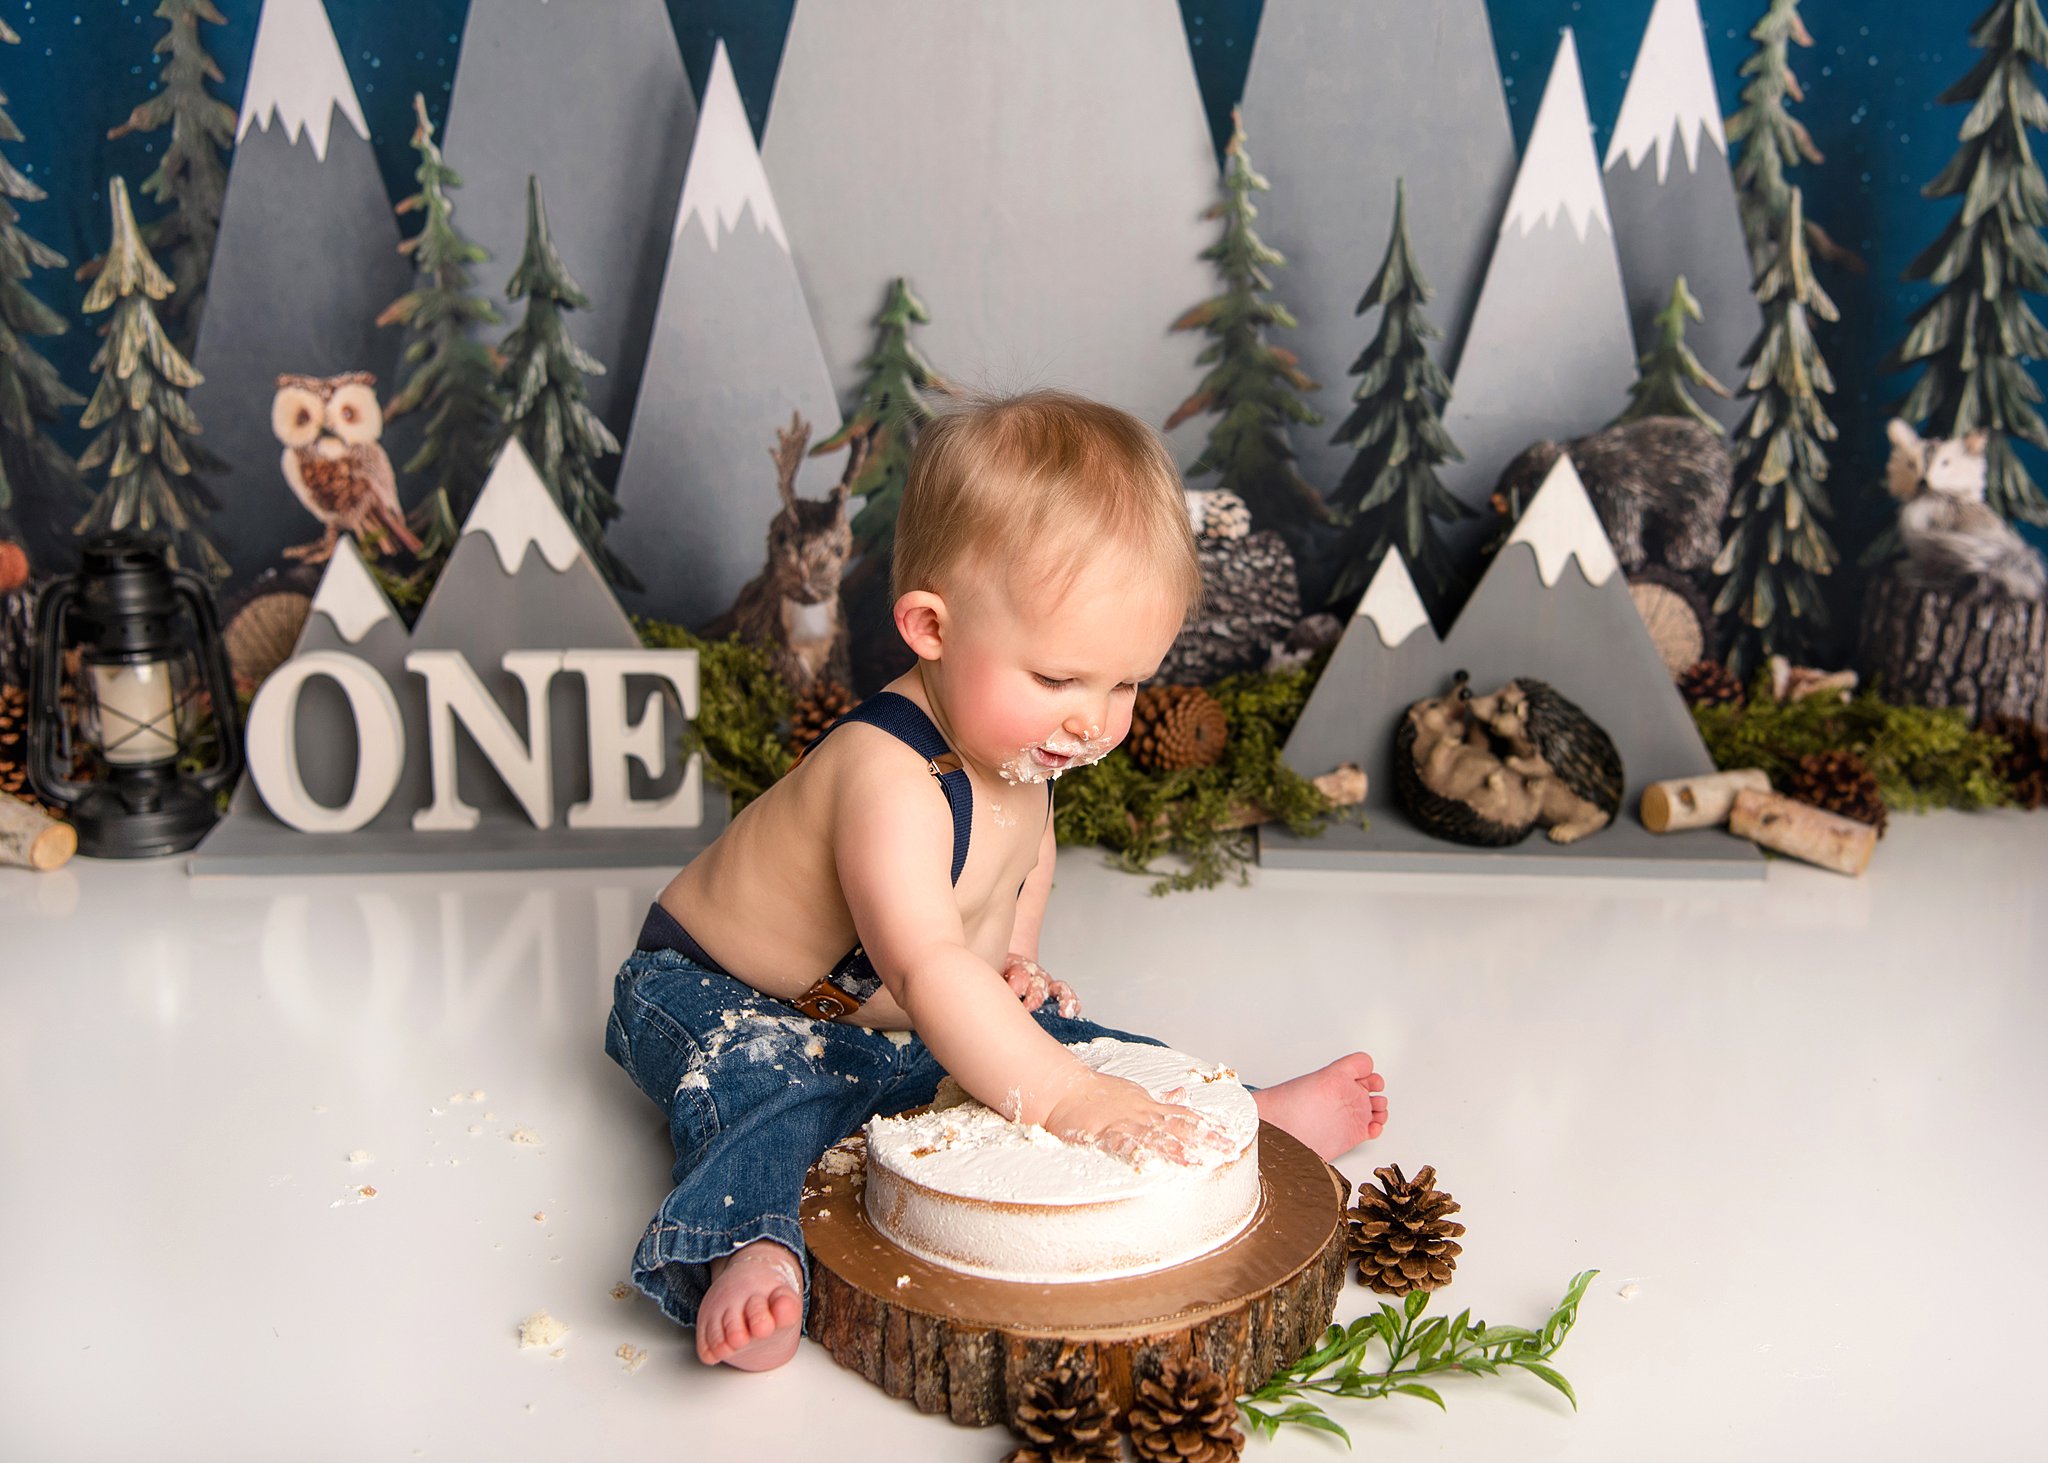 A toddler wearing blue denim overalls smashes his birthday cake in a mountain scene things to do in waco tx with toddlers